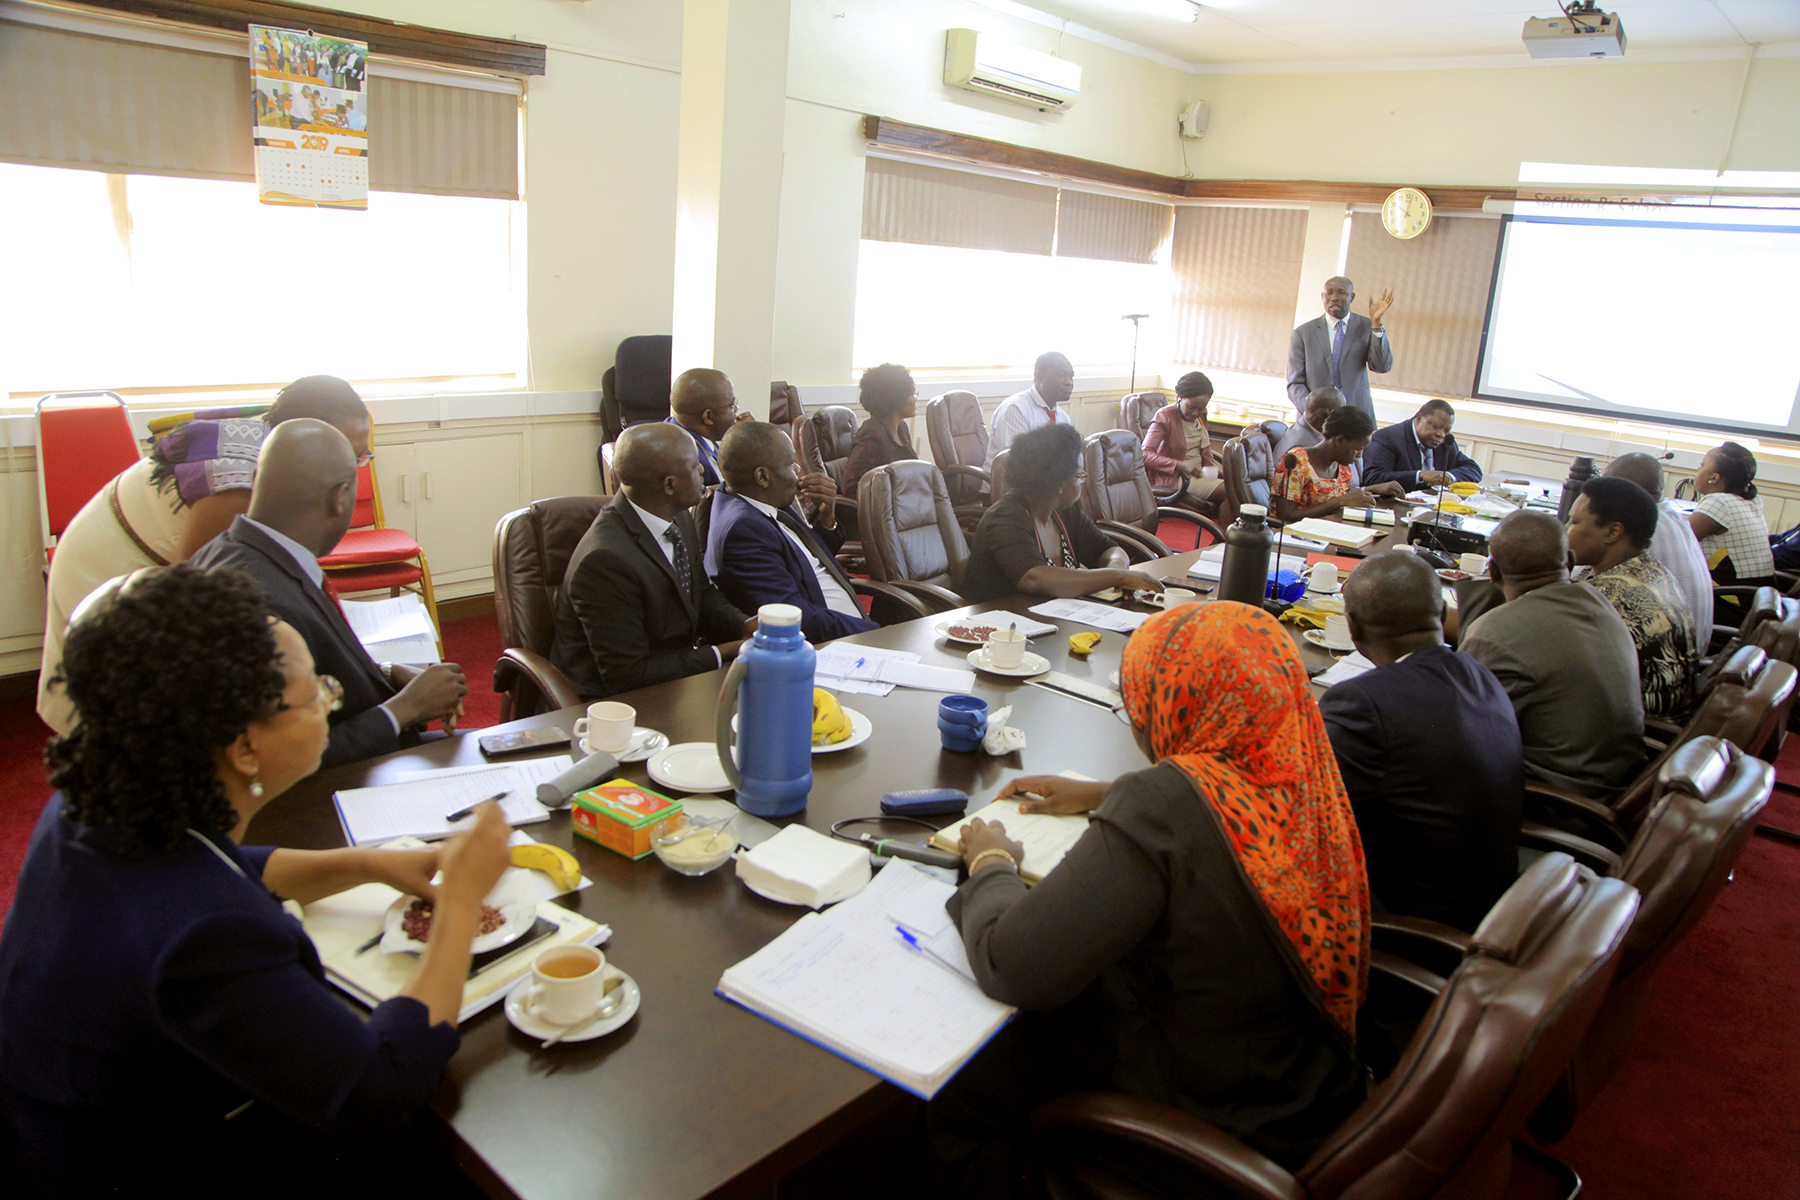 MINISTRY PRESENTS STAKEHOLDERS' VIEWS ON PUBLIC SERVICE STANDING ORDERS 2010 REVIEWS TO SMT IN THE BOARDROOM